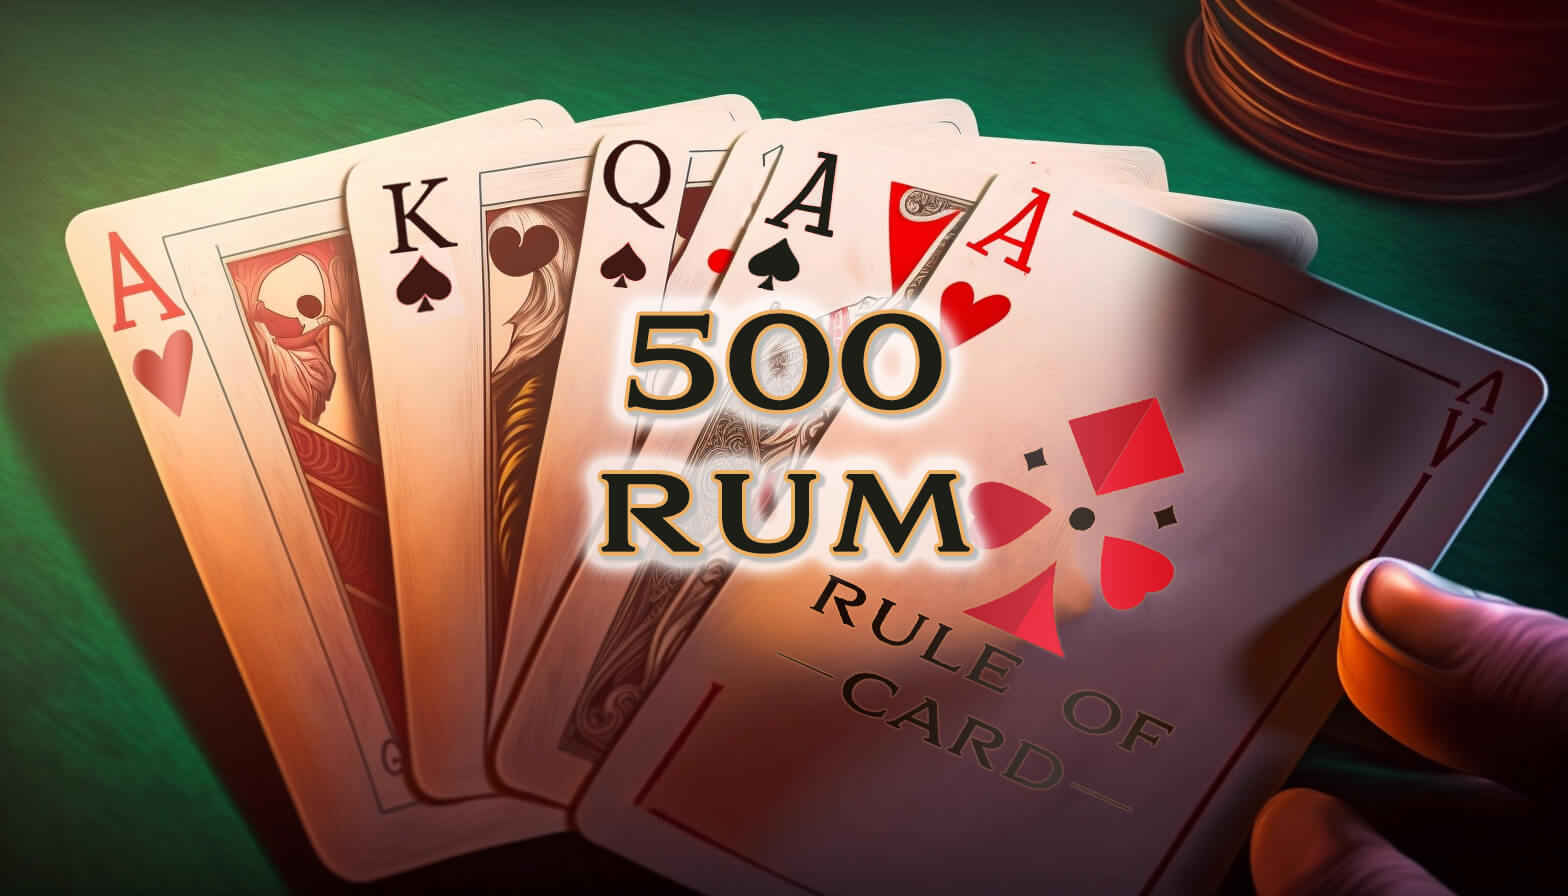 Playing the card game 500 Rum